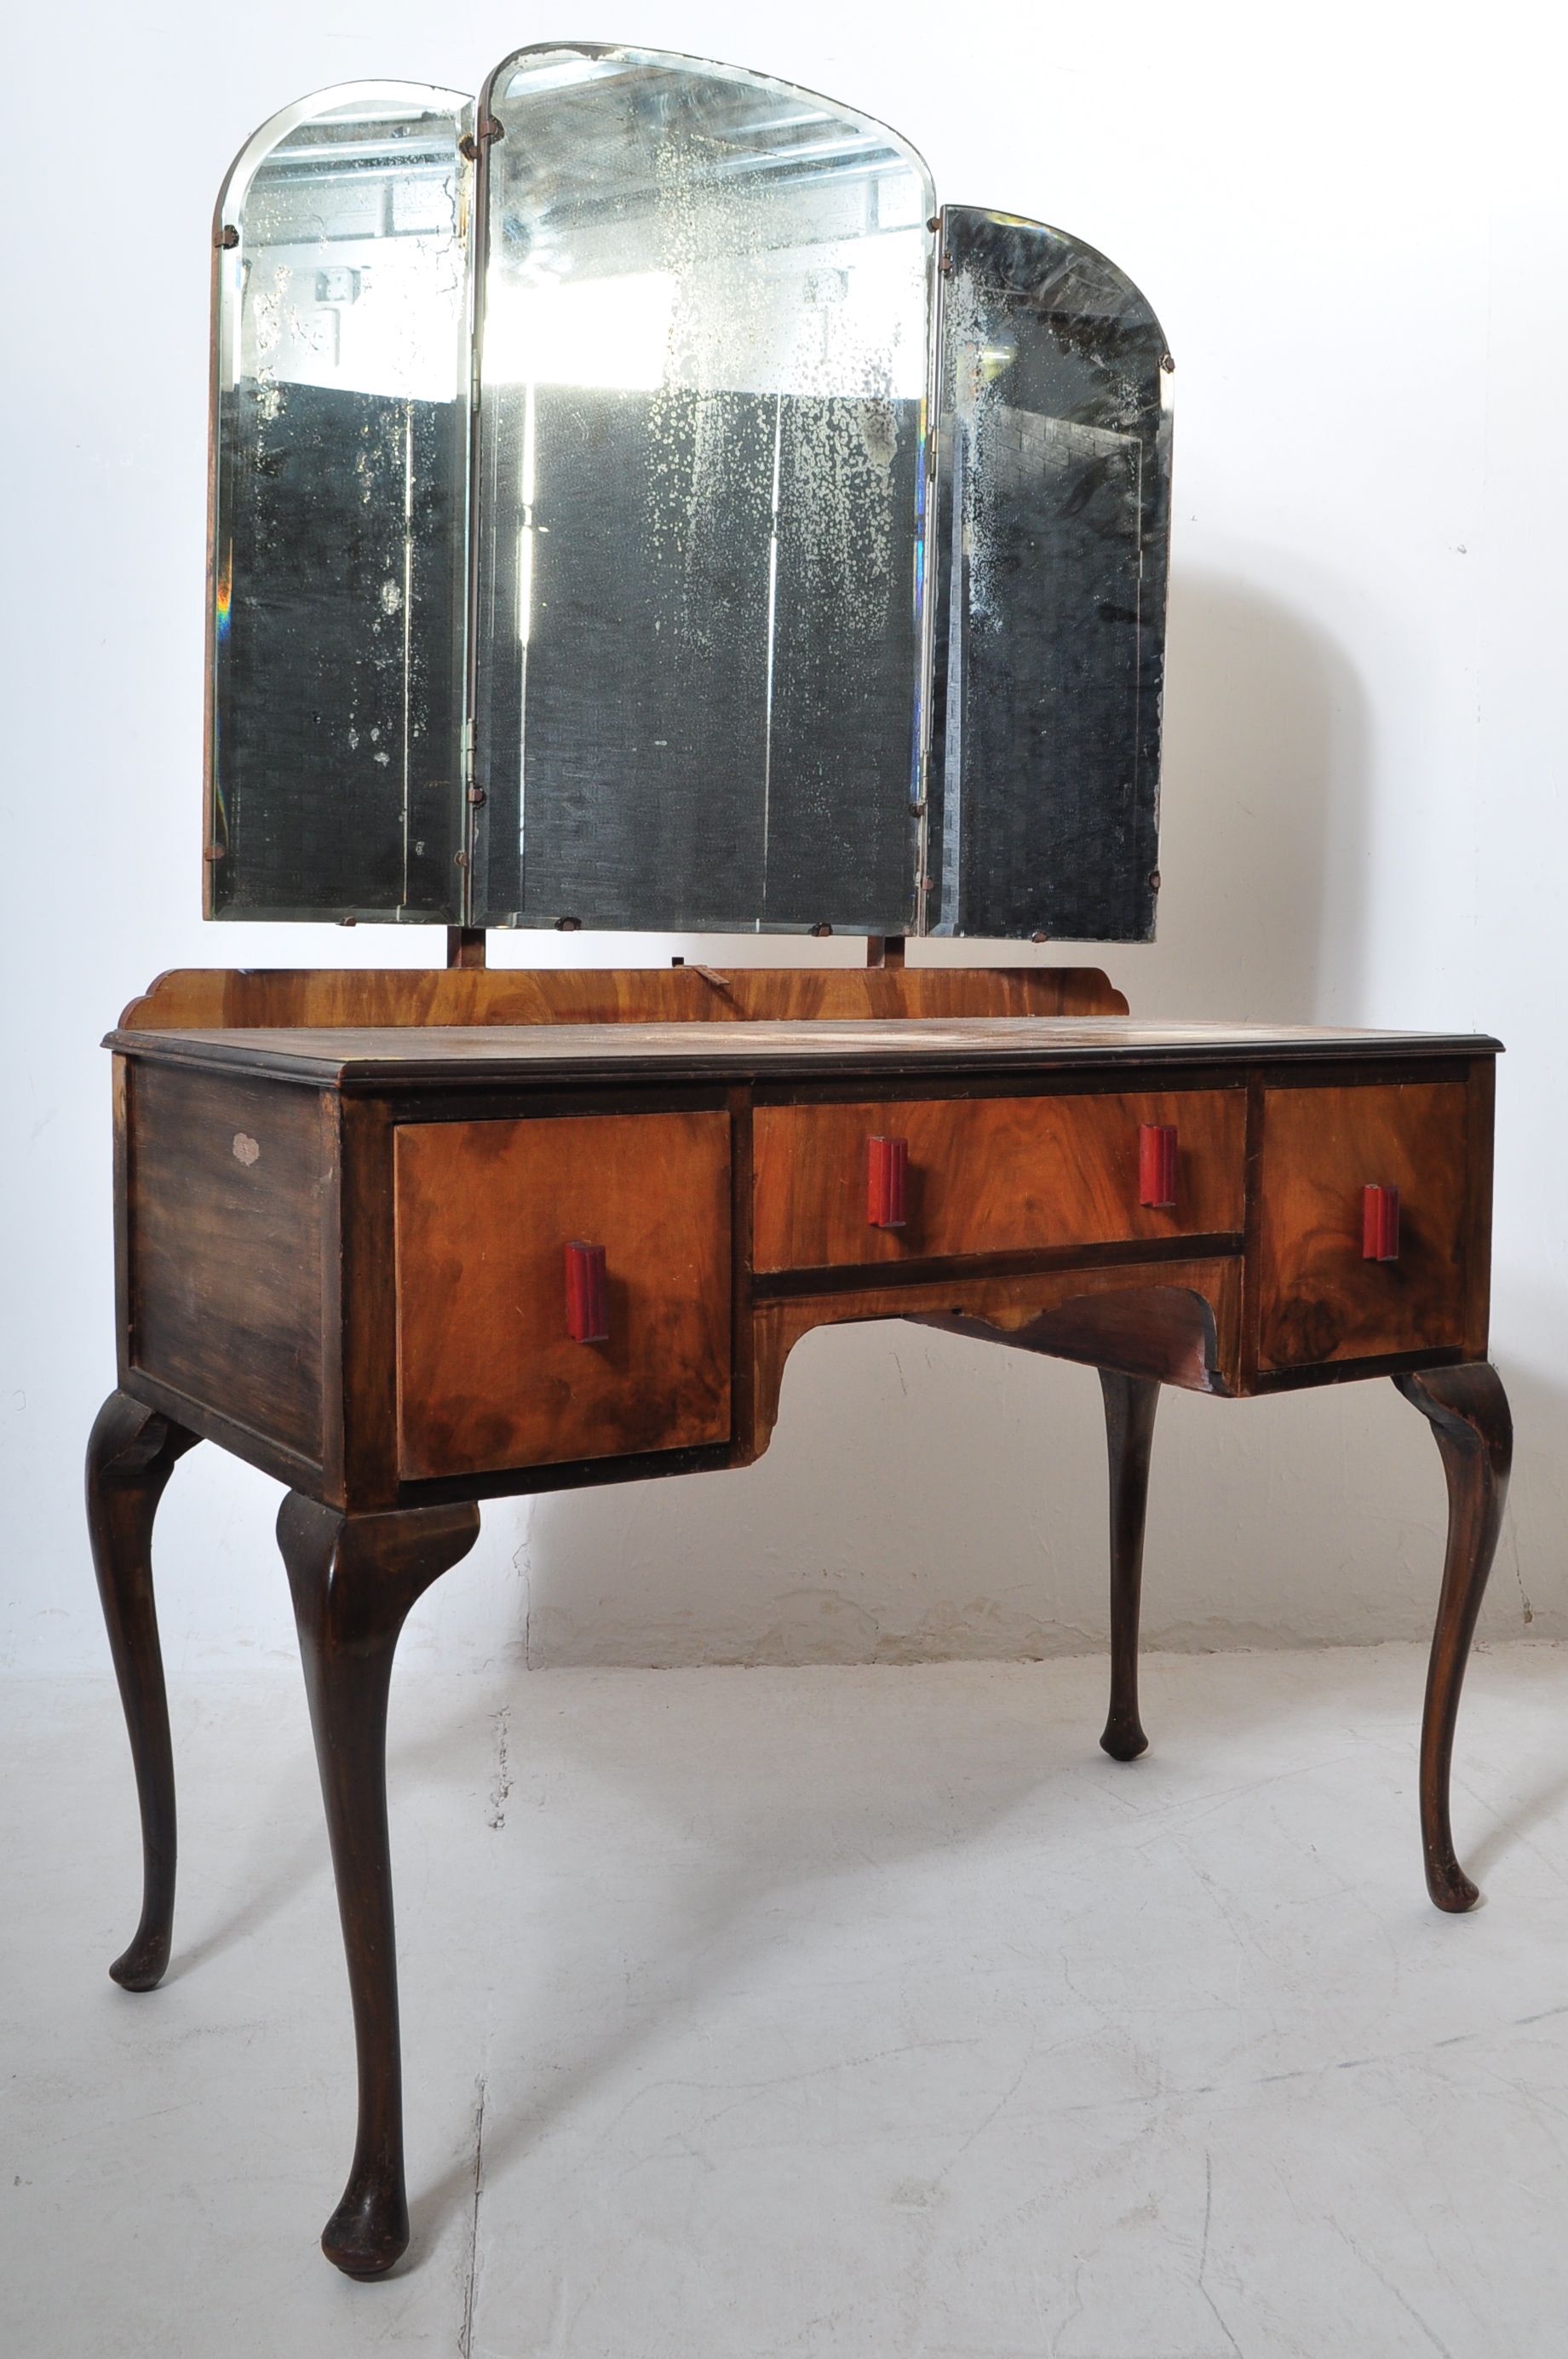 1940S WALNUT QUEEN ANNE REVIVAL LADIES DRESSING TABLE